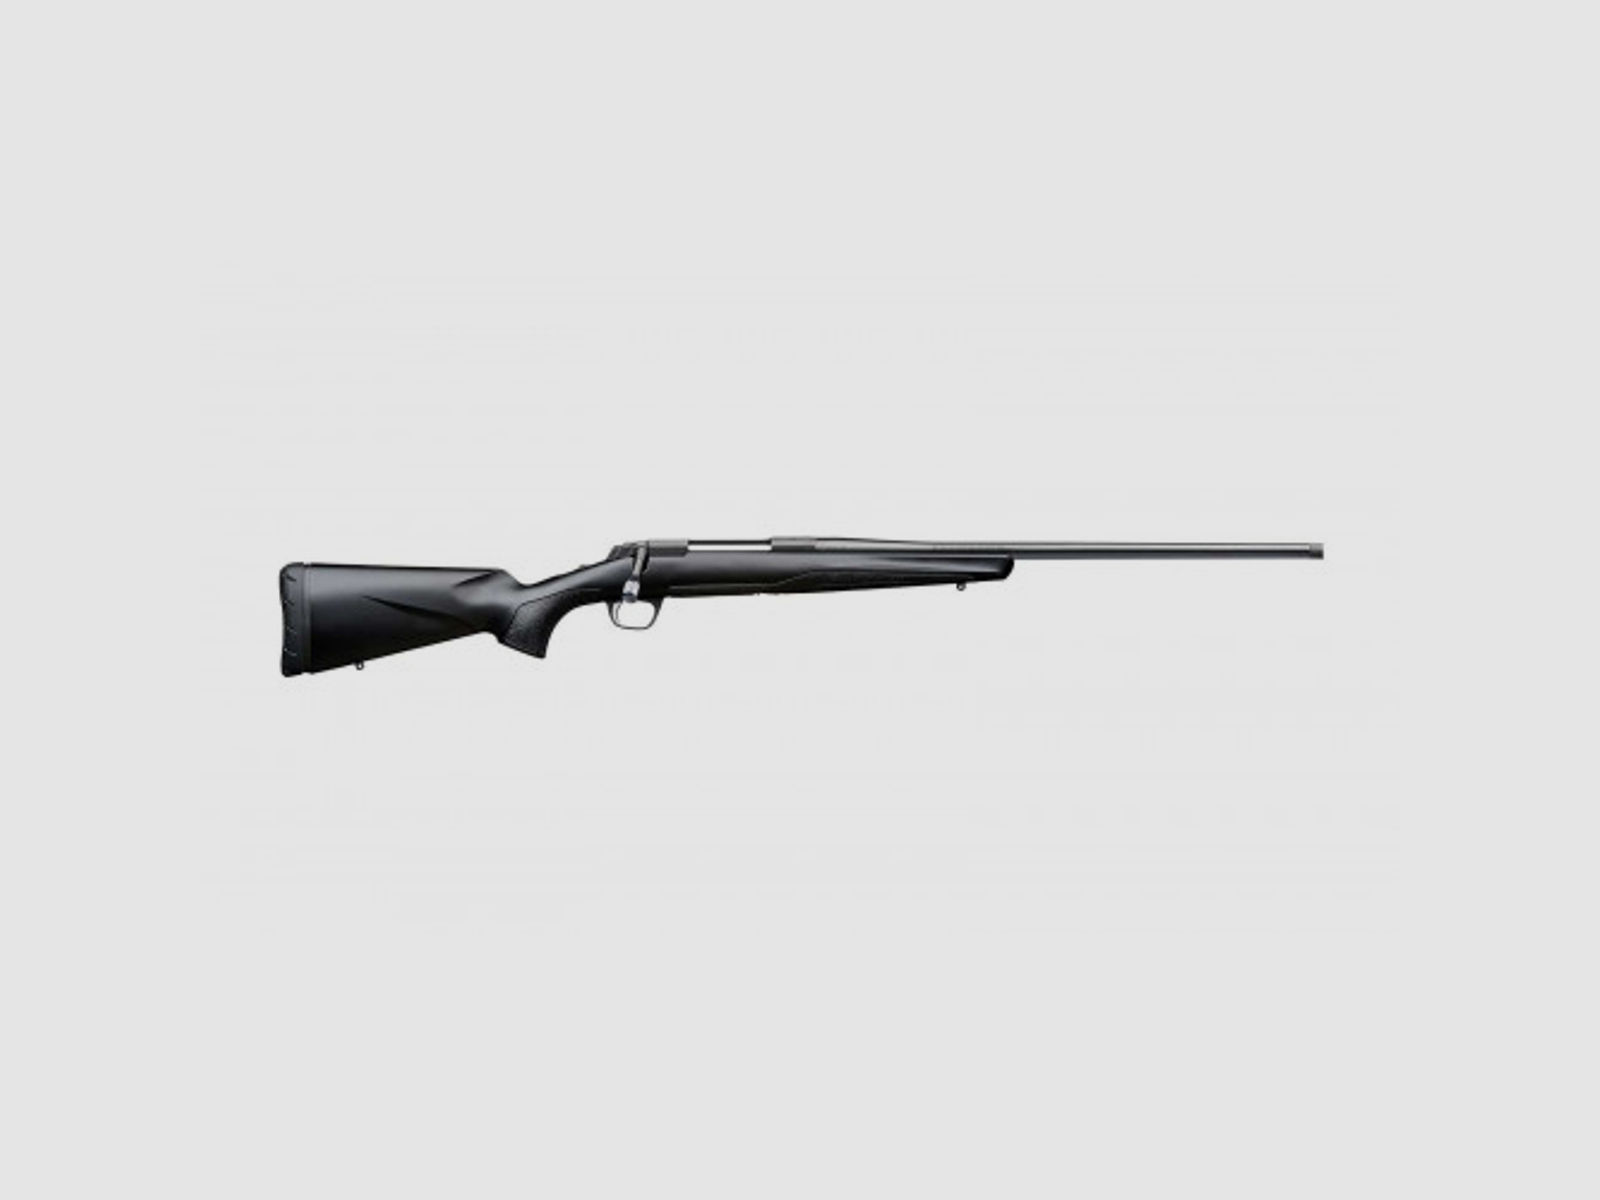 Browning Repetierbüchse X-Bolt Composite Black Threaded; M14x1